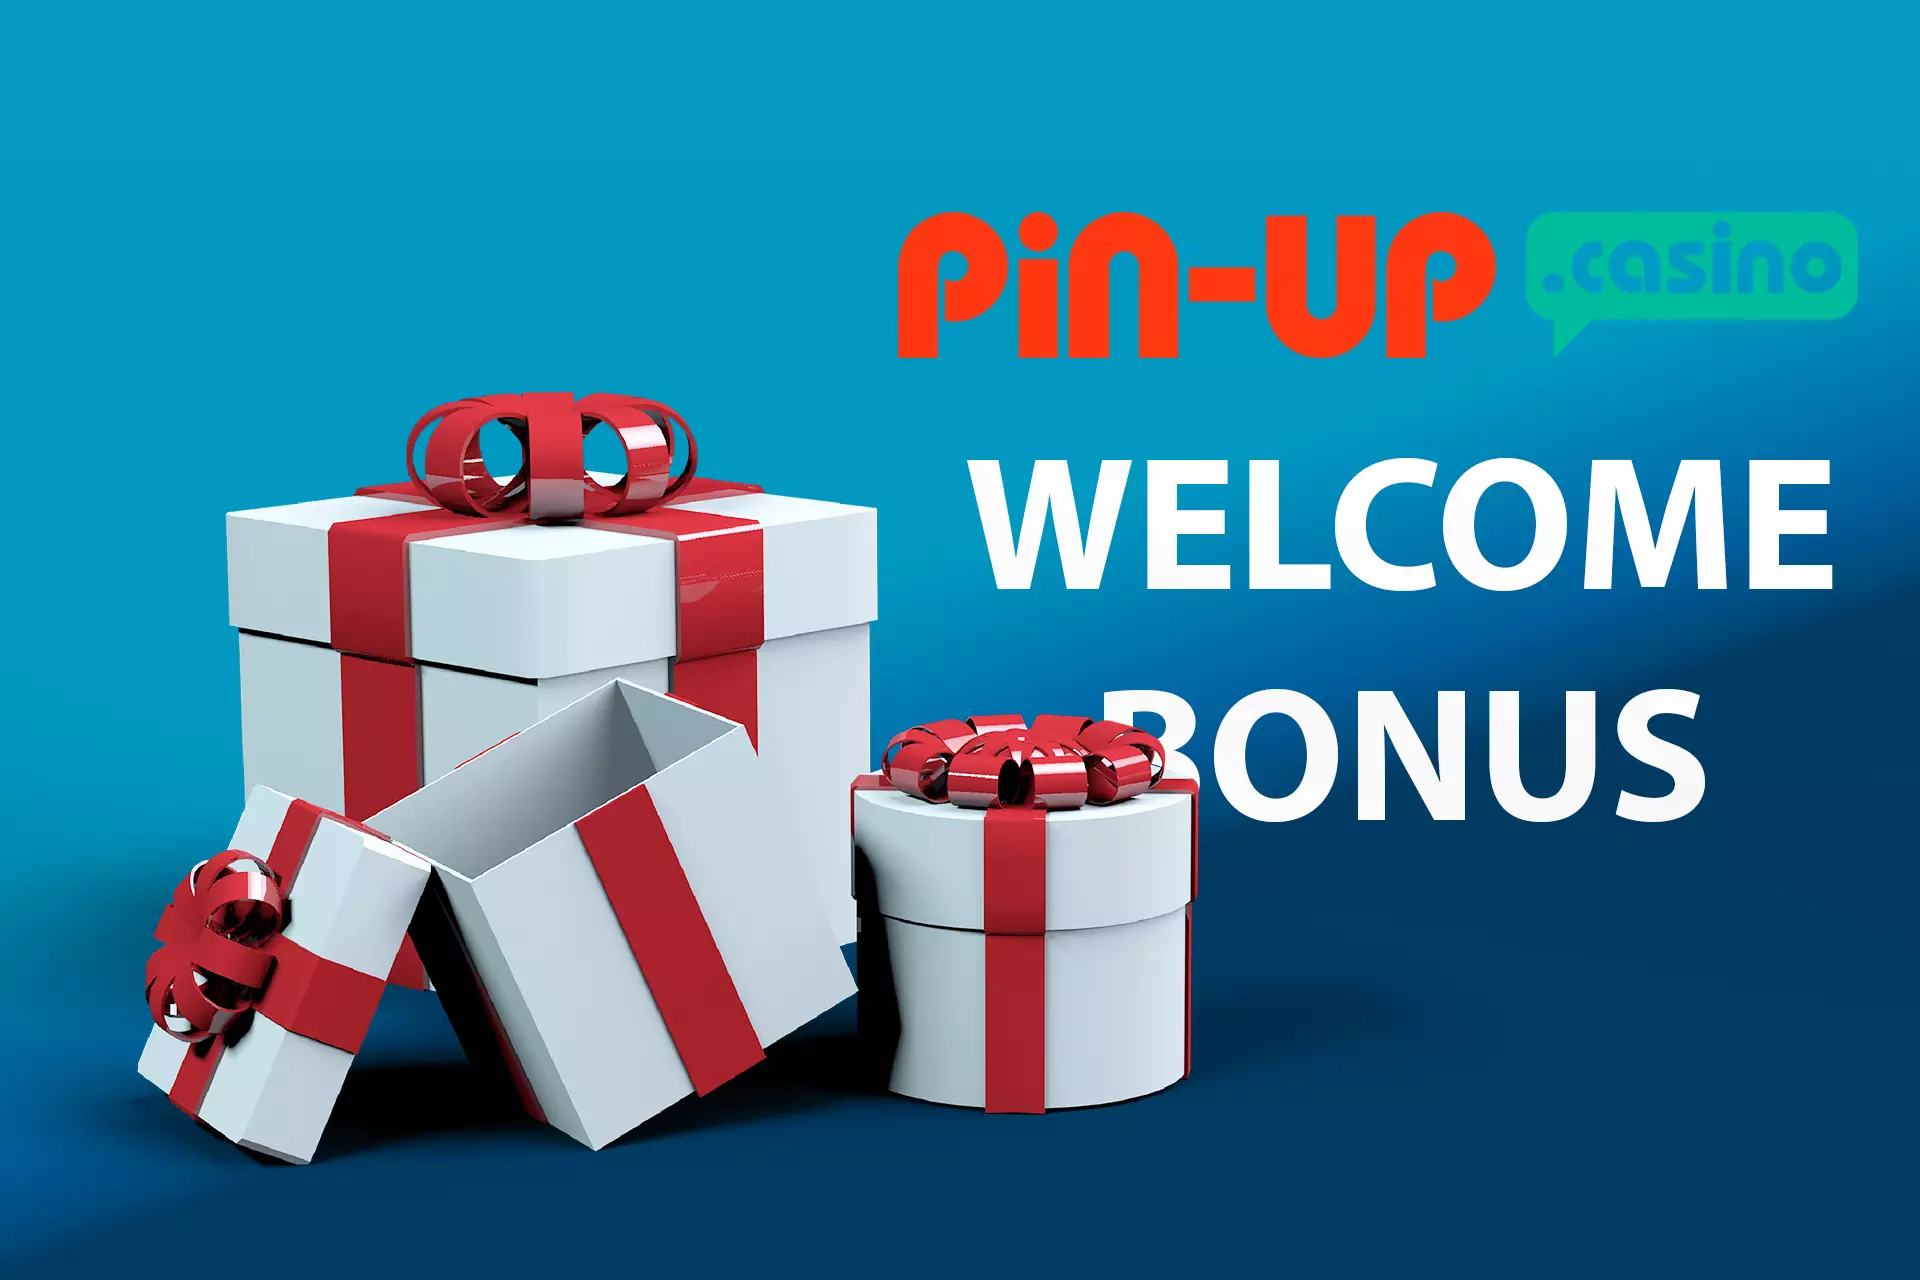 Make you first deposit and get the welcome bonus.